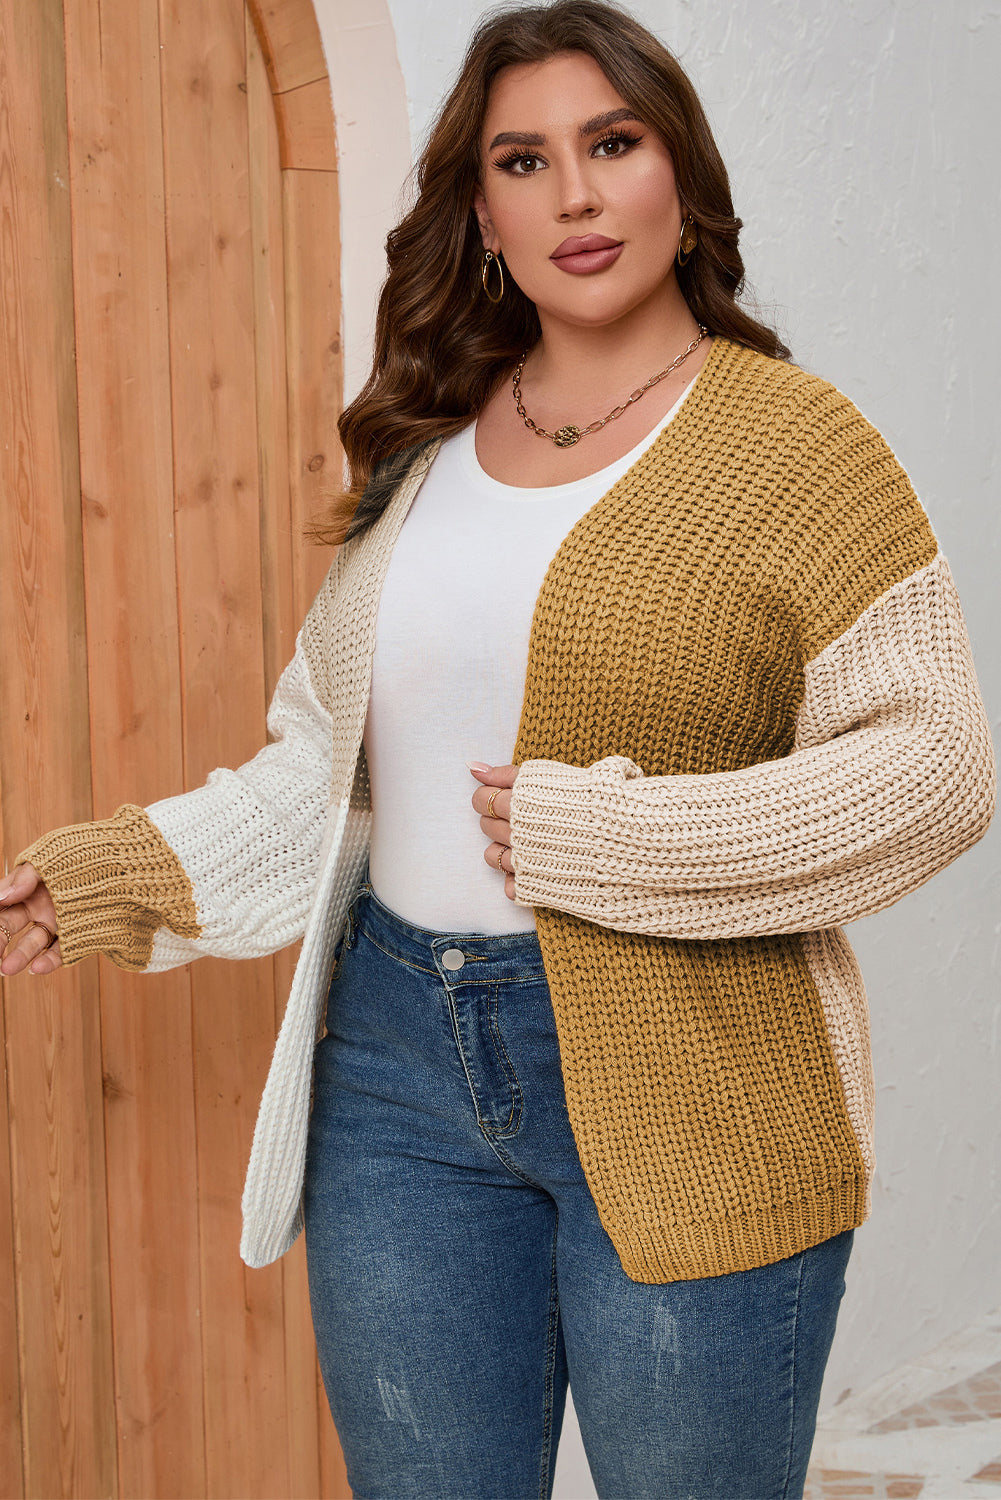 Plus Size Color Block Dropped Shoulder Cardigan - Women’s Clothing & Accessories - Shirts & Tops - 3 - 2024